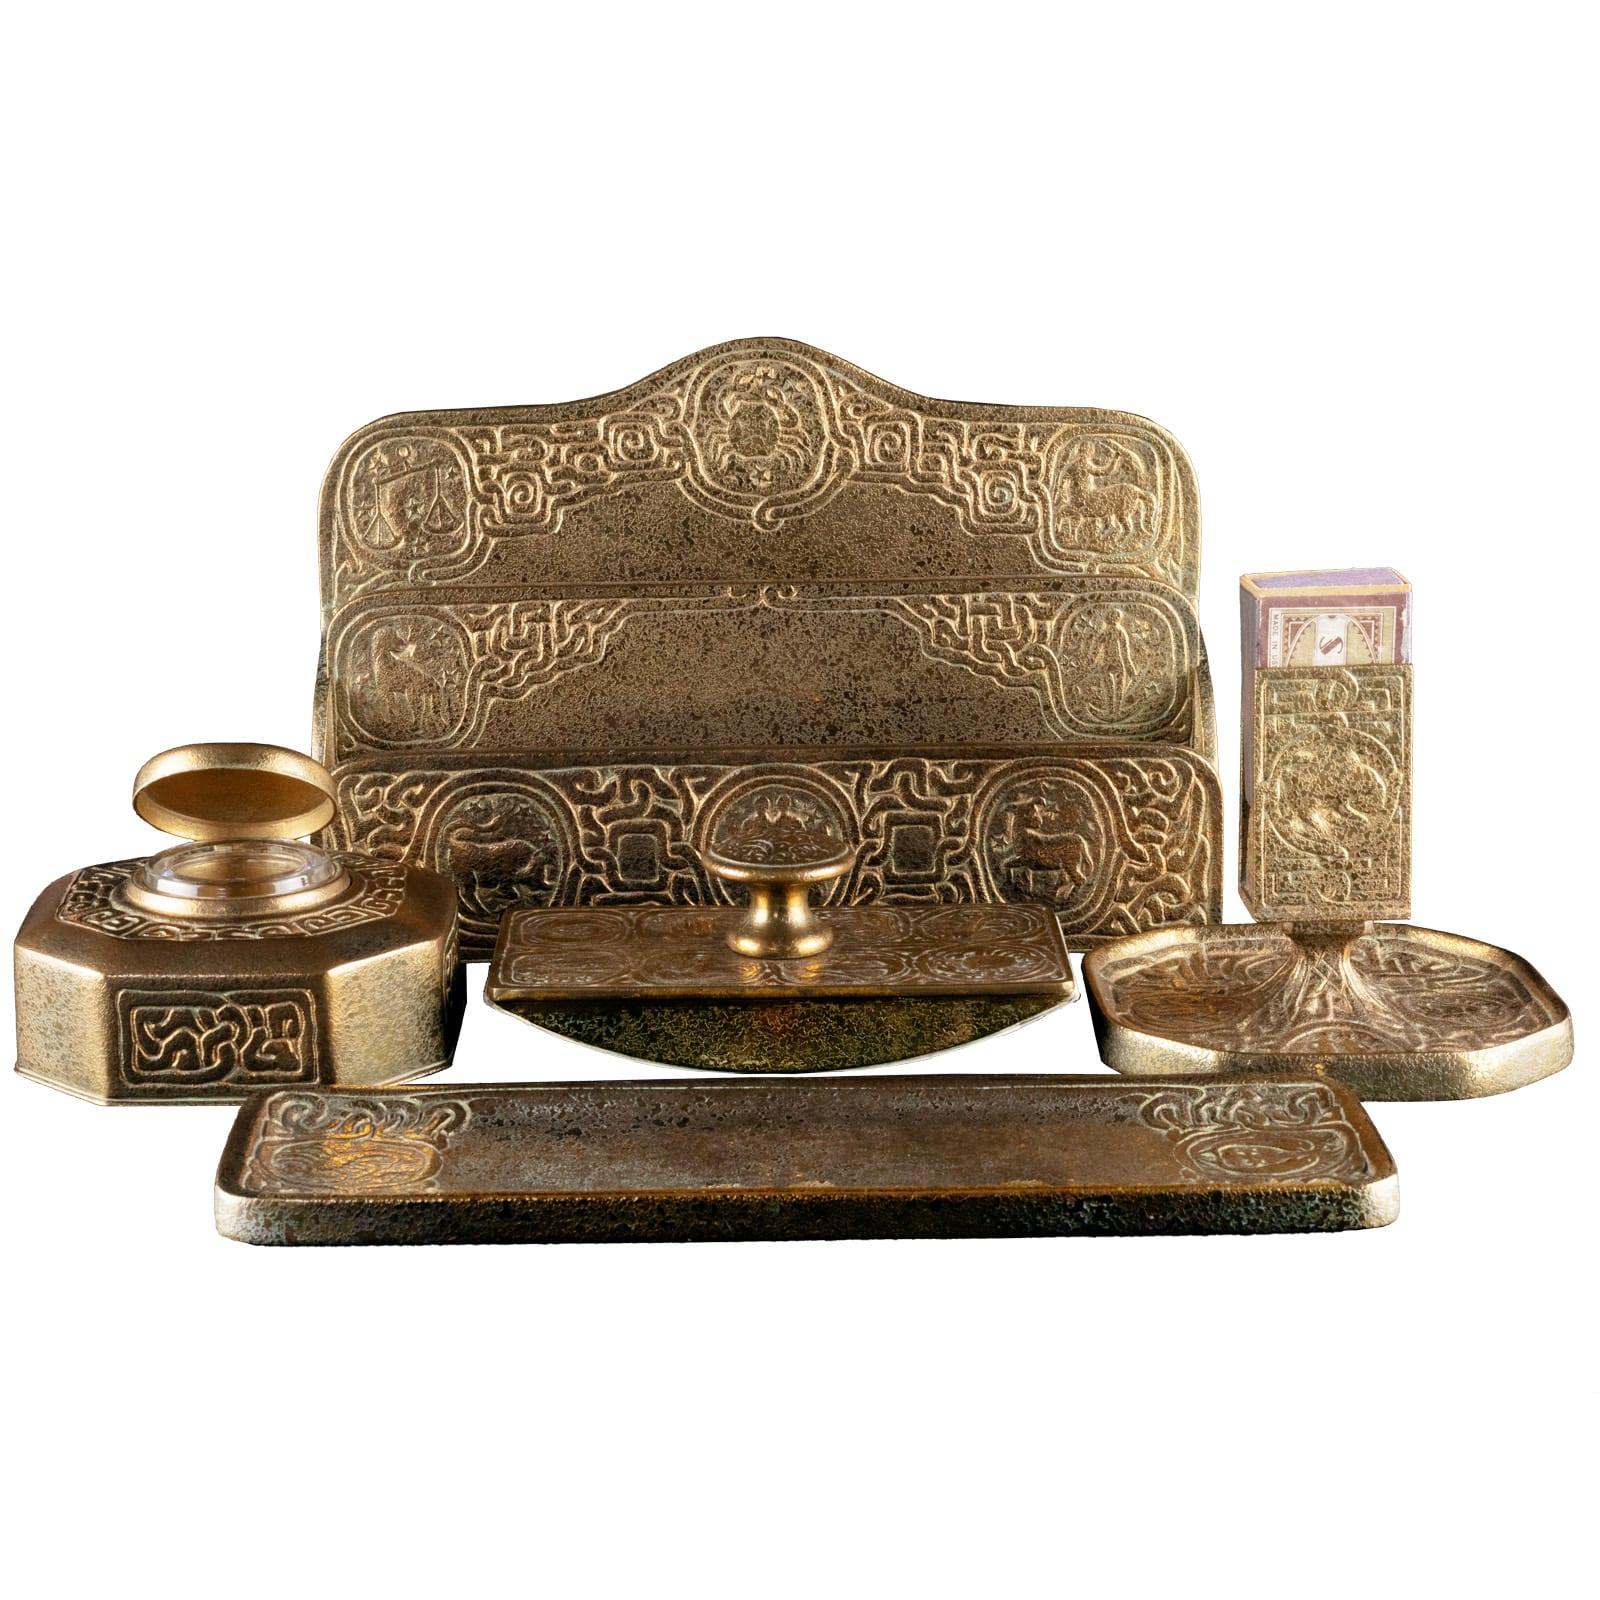 An extraordinarily well kept 6 piece set of the beautiful Zodiac Desk Set made by Tiffany Studios in the late 19th and early 20th century. It captures the aesthetic zeitgeist of the period perfectly in it's Art Nouveau low relief design in bronze